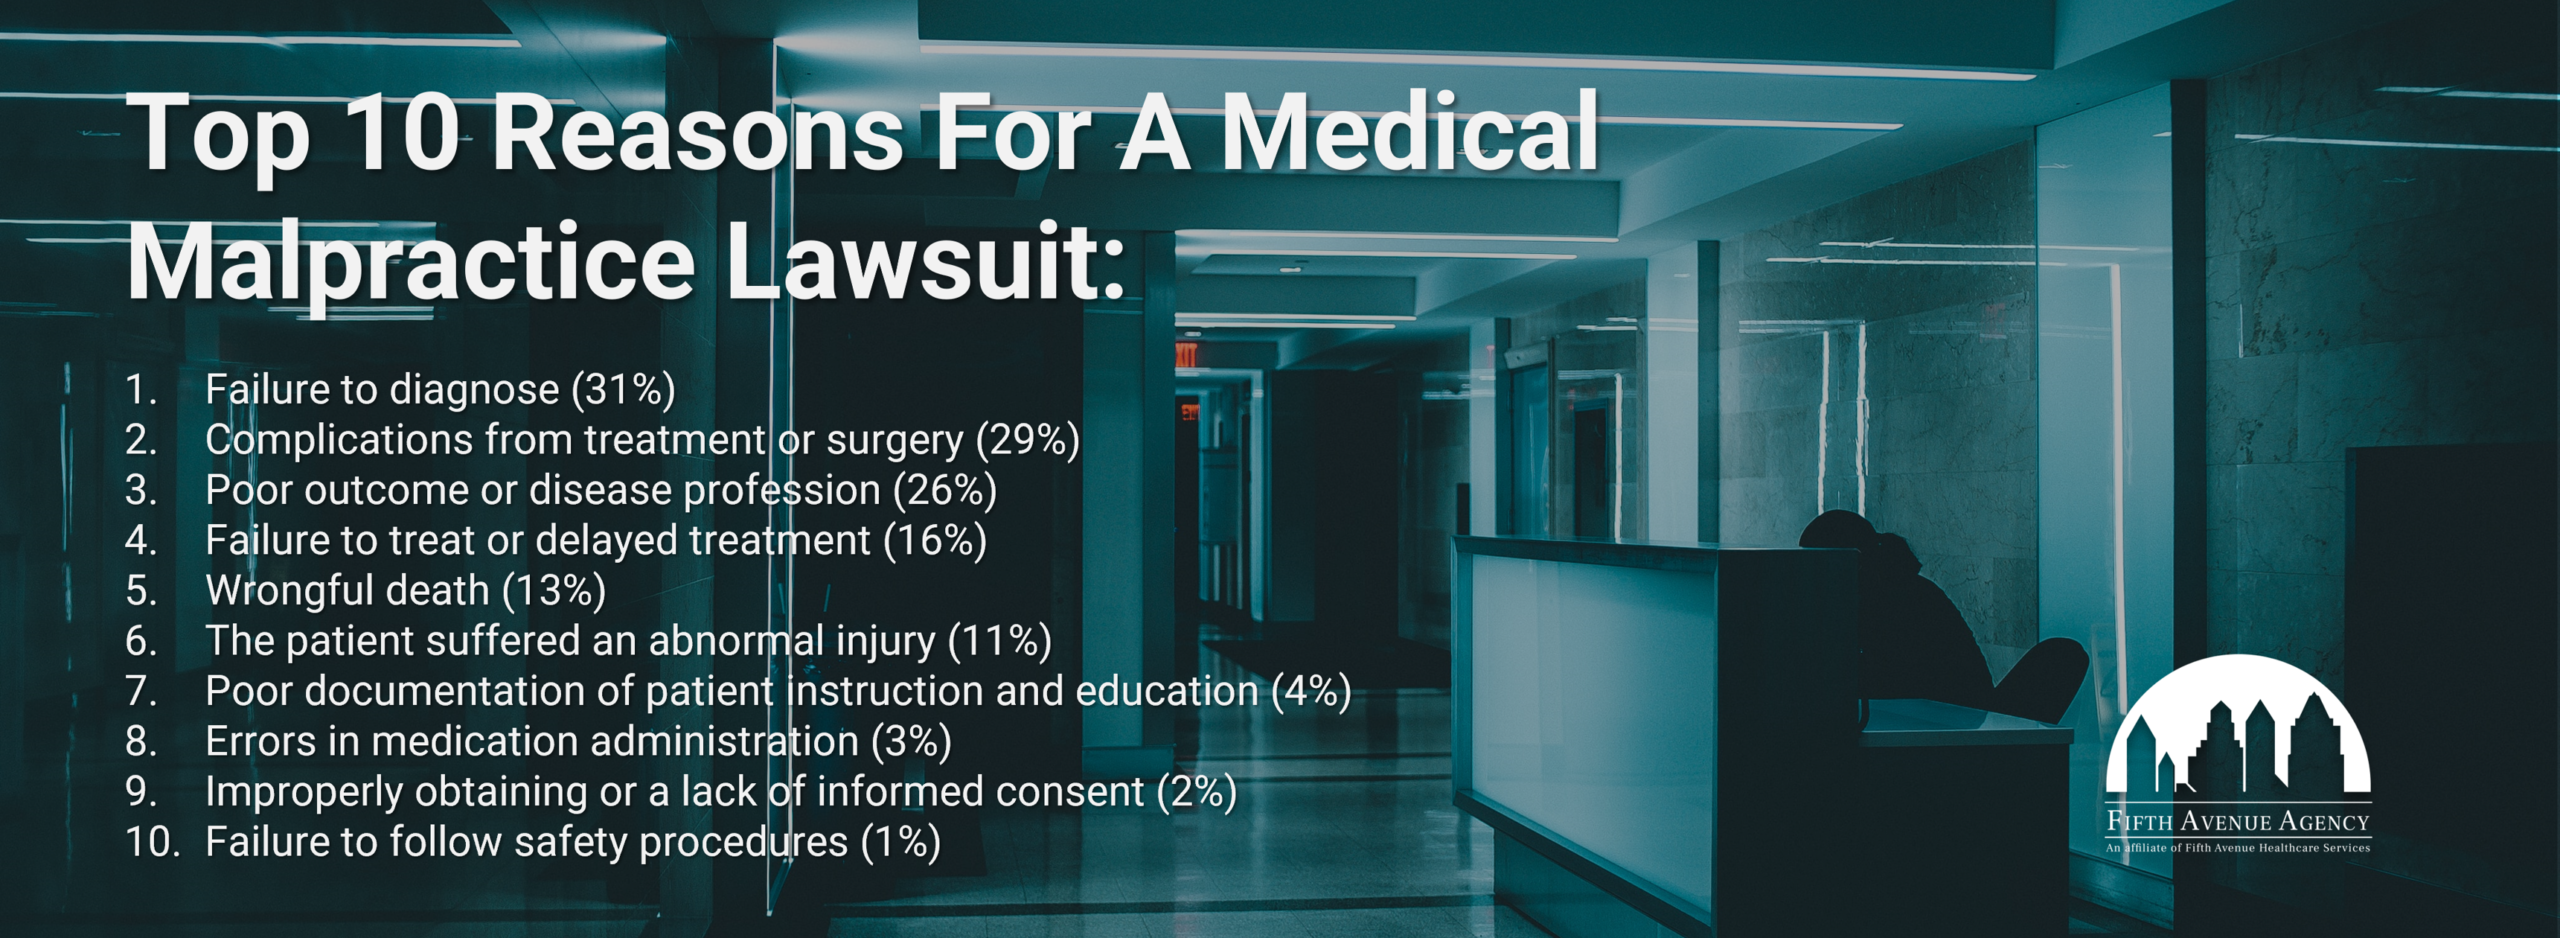 Top 10 Reasons For A Medical Malpractice Lawsuit